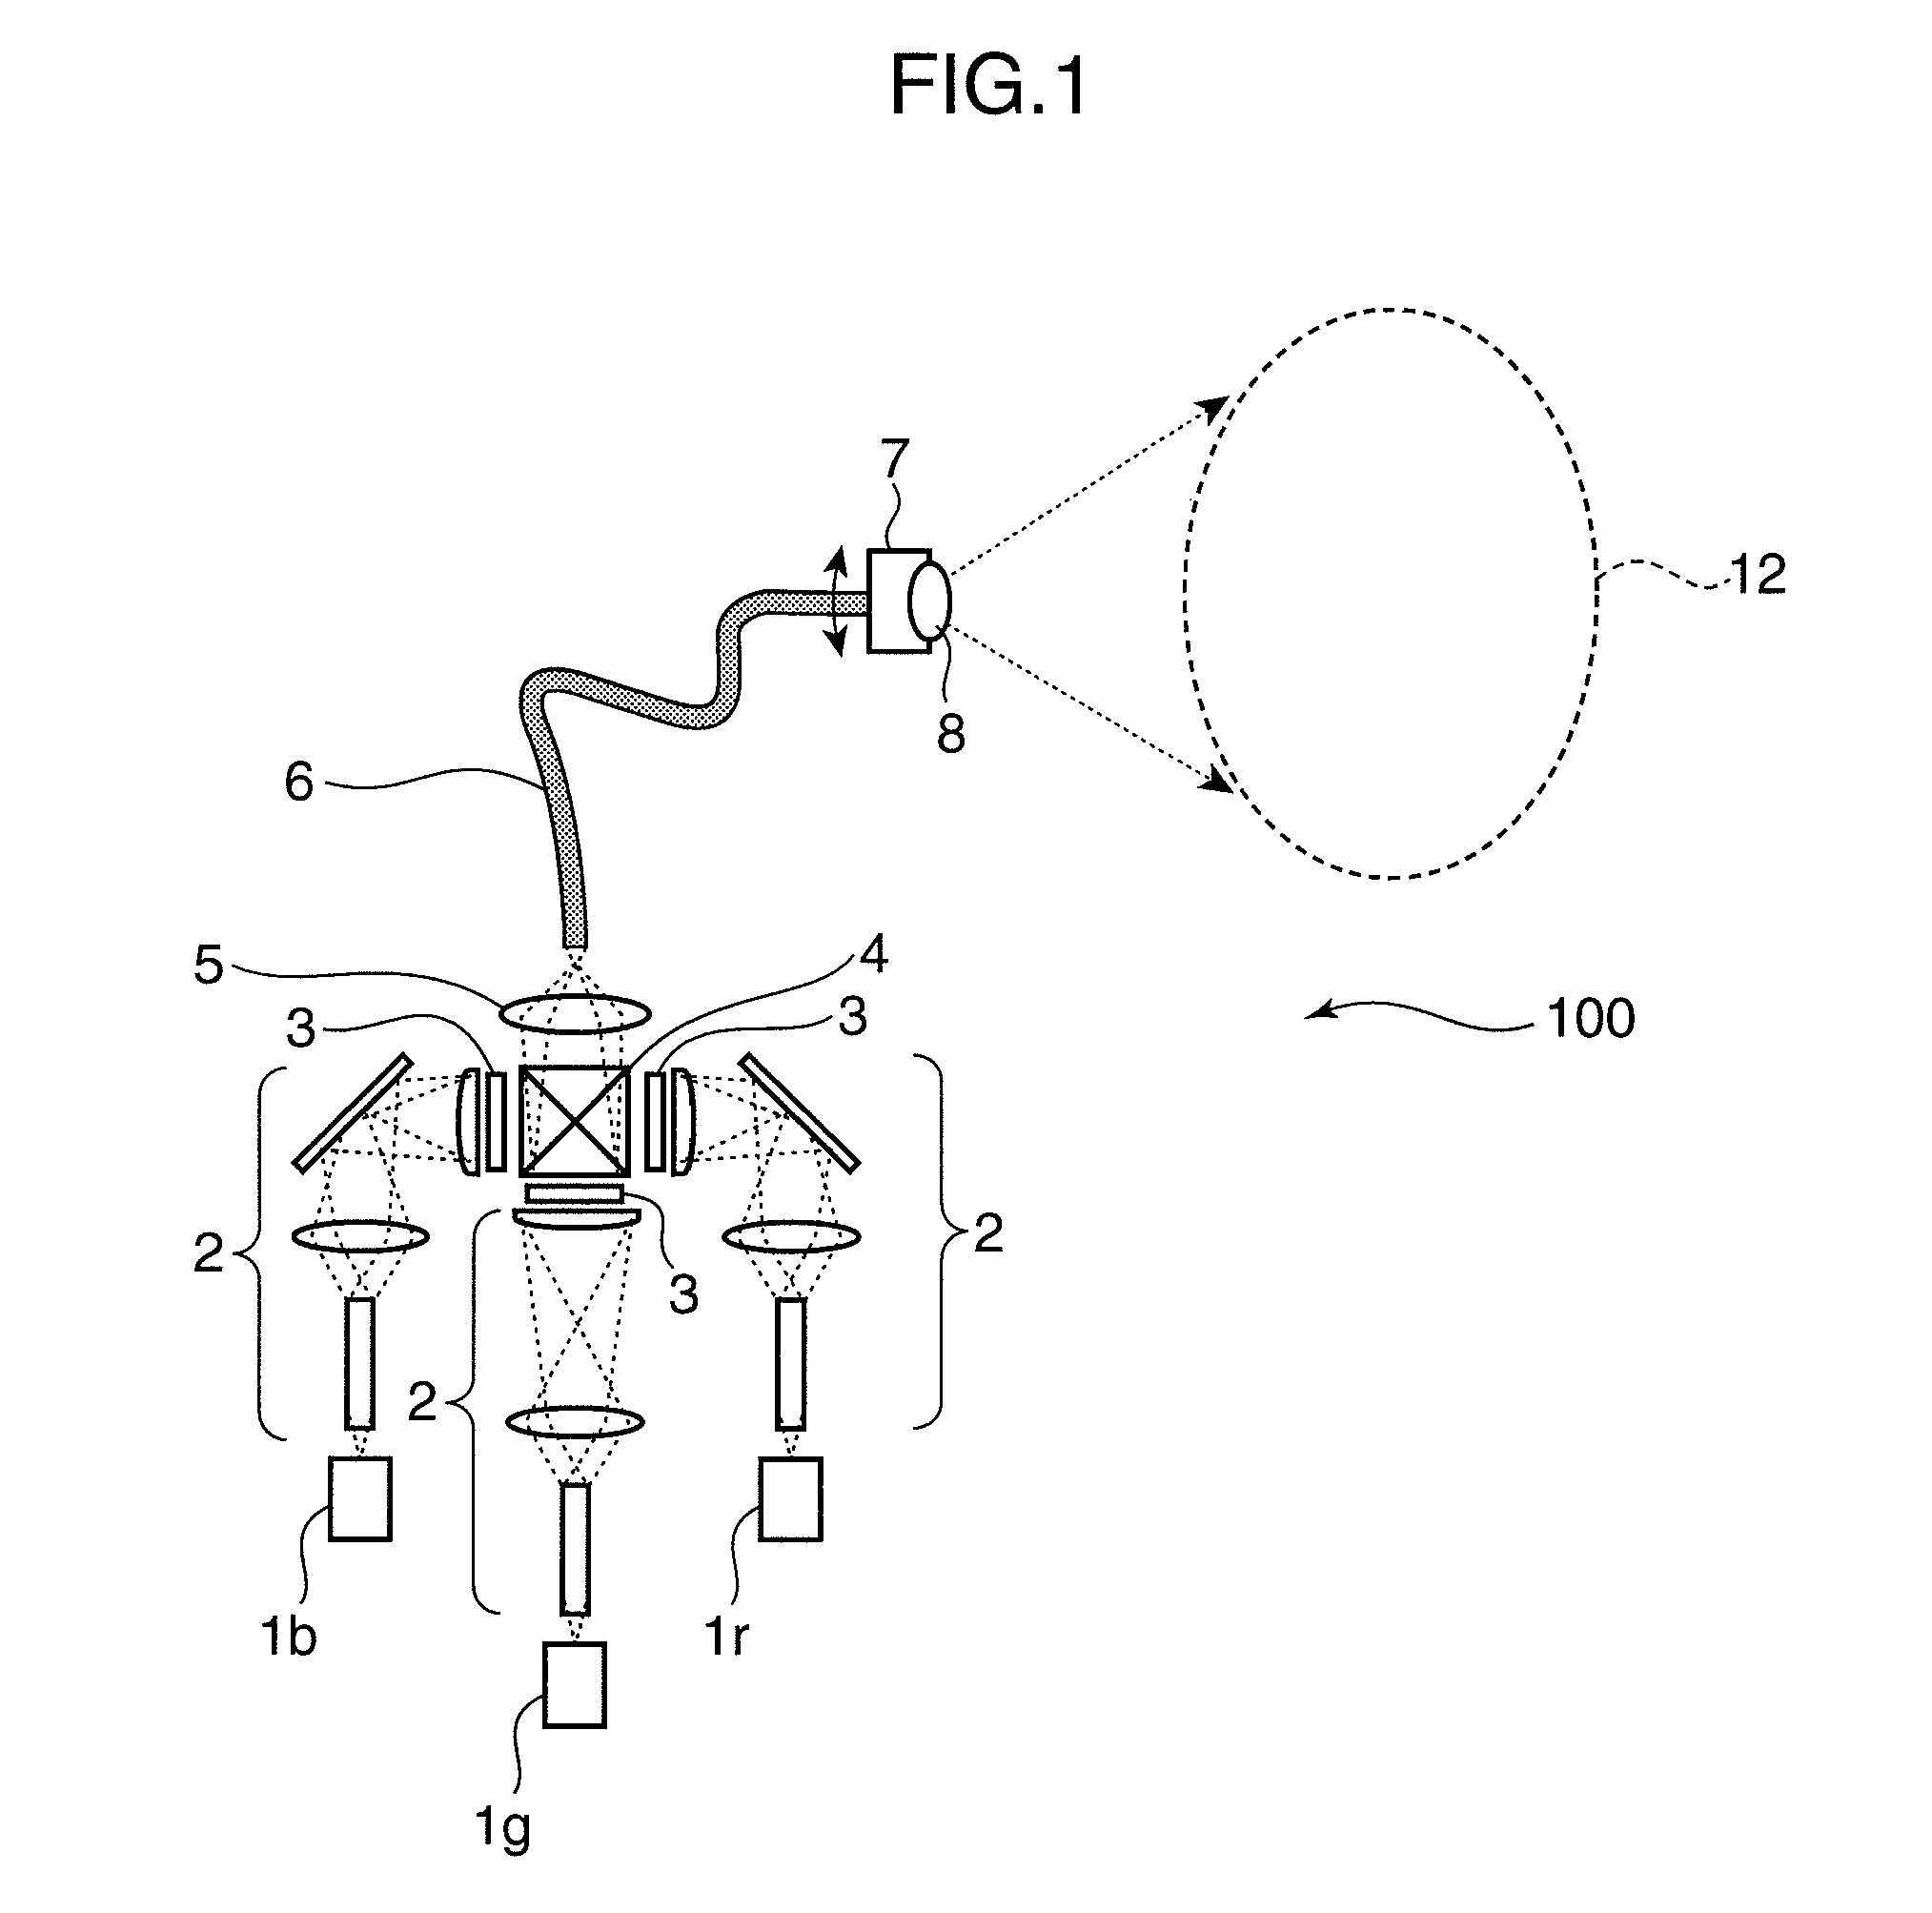 Projector having a projection angle adjusting mechanism